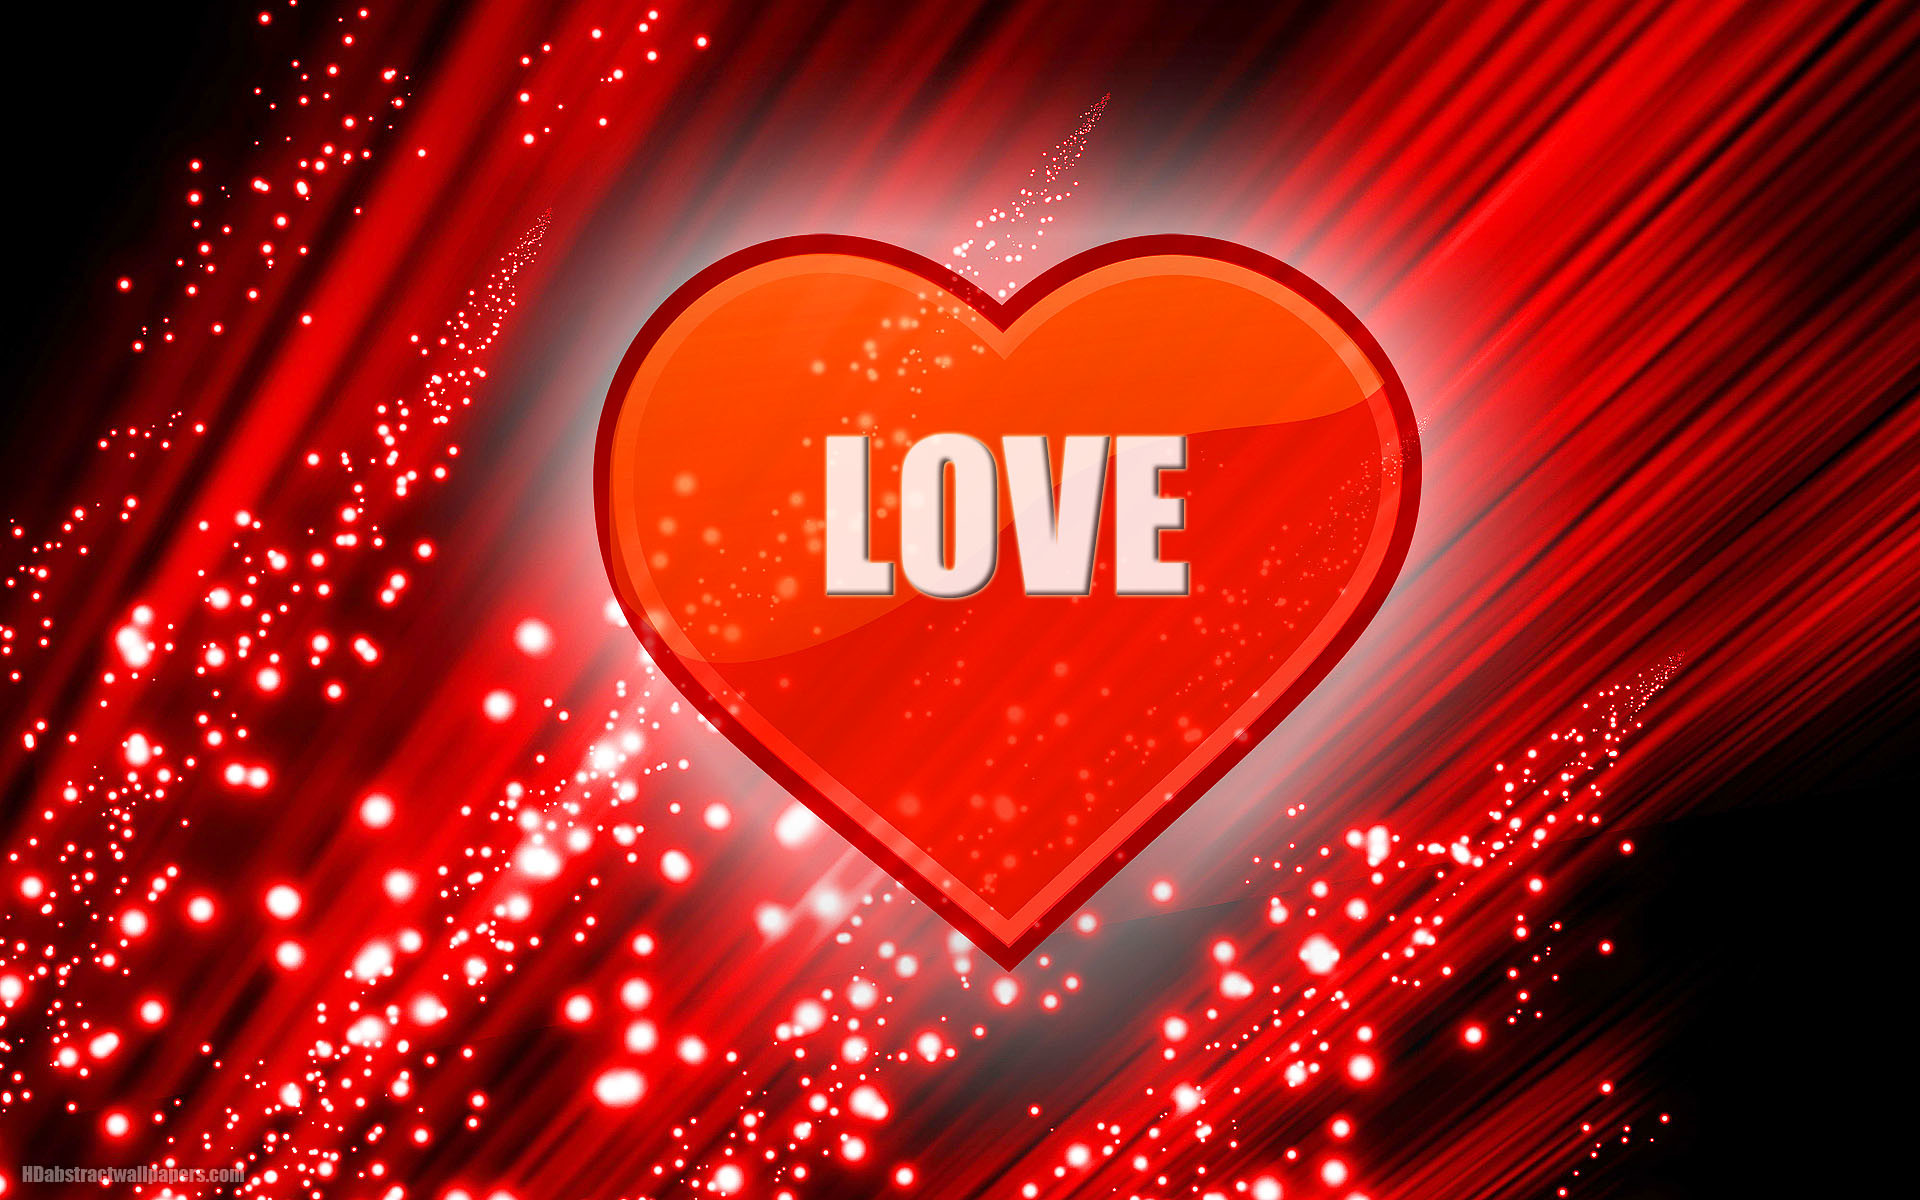 Red abstract wallpaper with big heart and text love